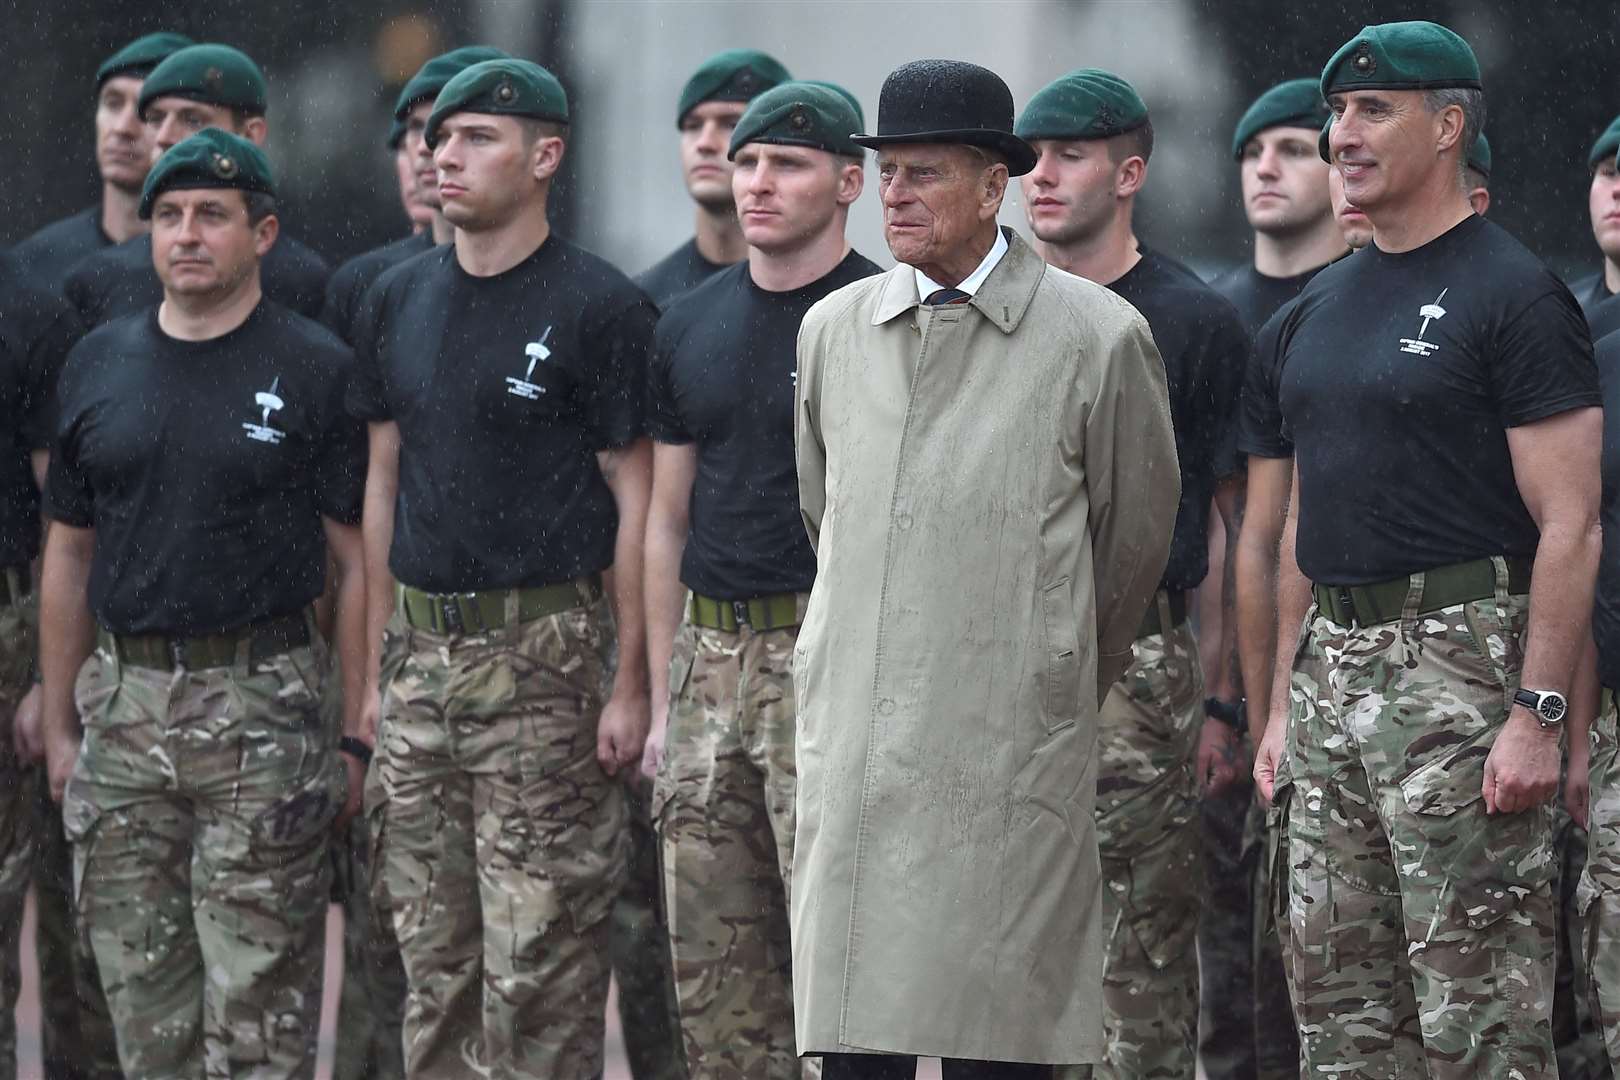 The Duke of Edinburgh meets Royal Marines who completed incredible feats of endurance for charity (Hannah McKay/PA)